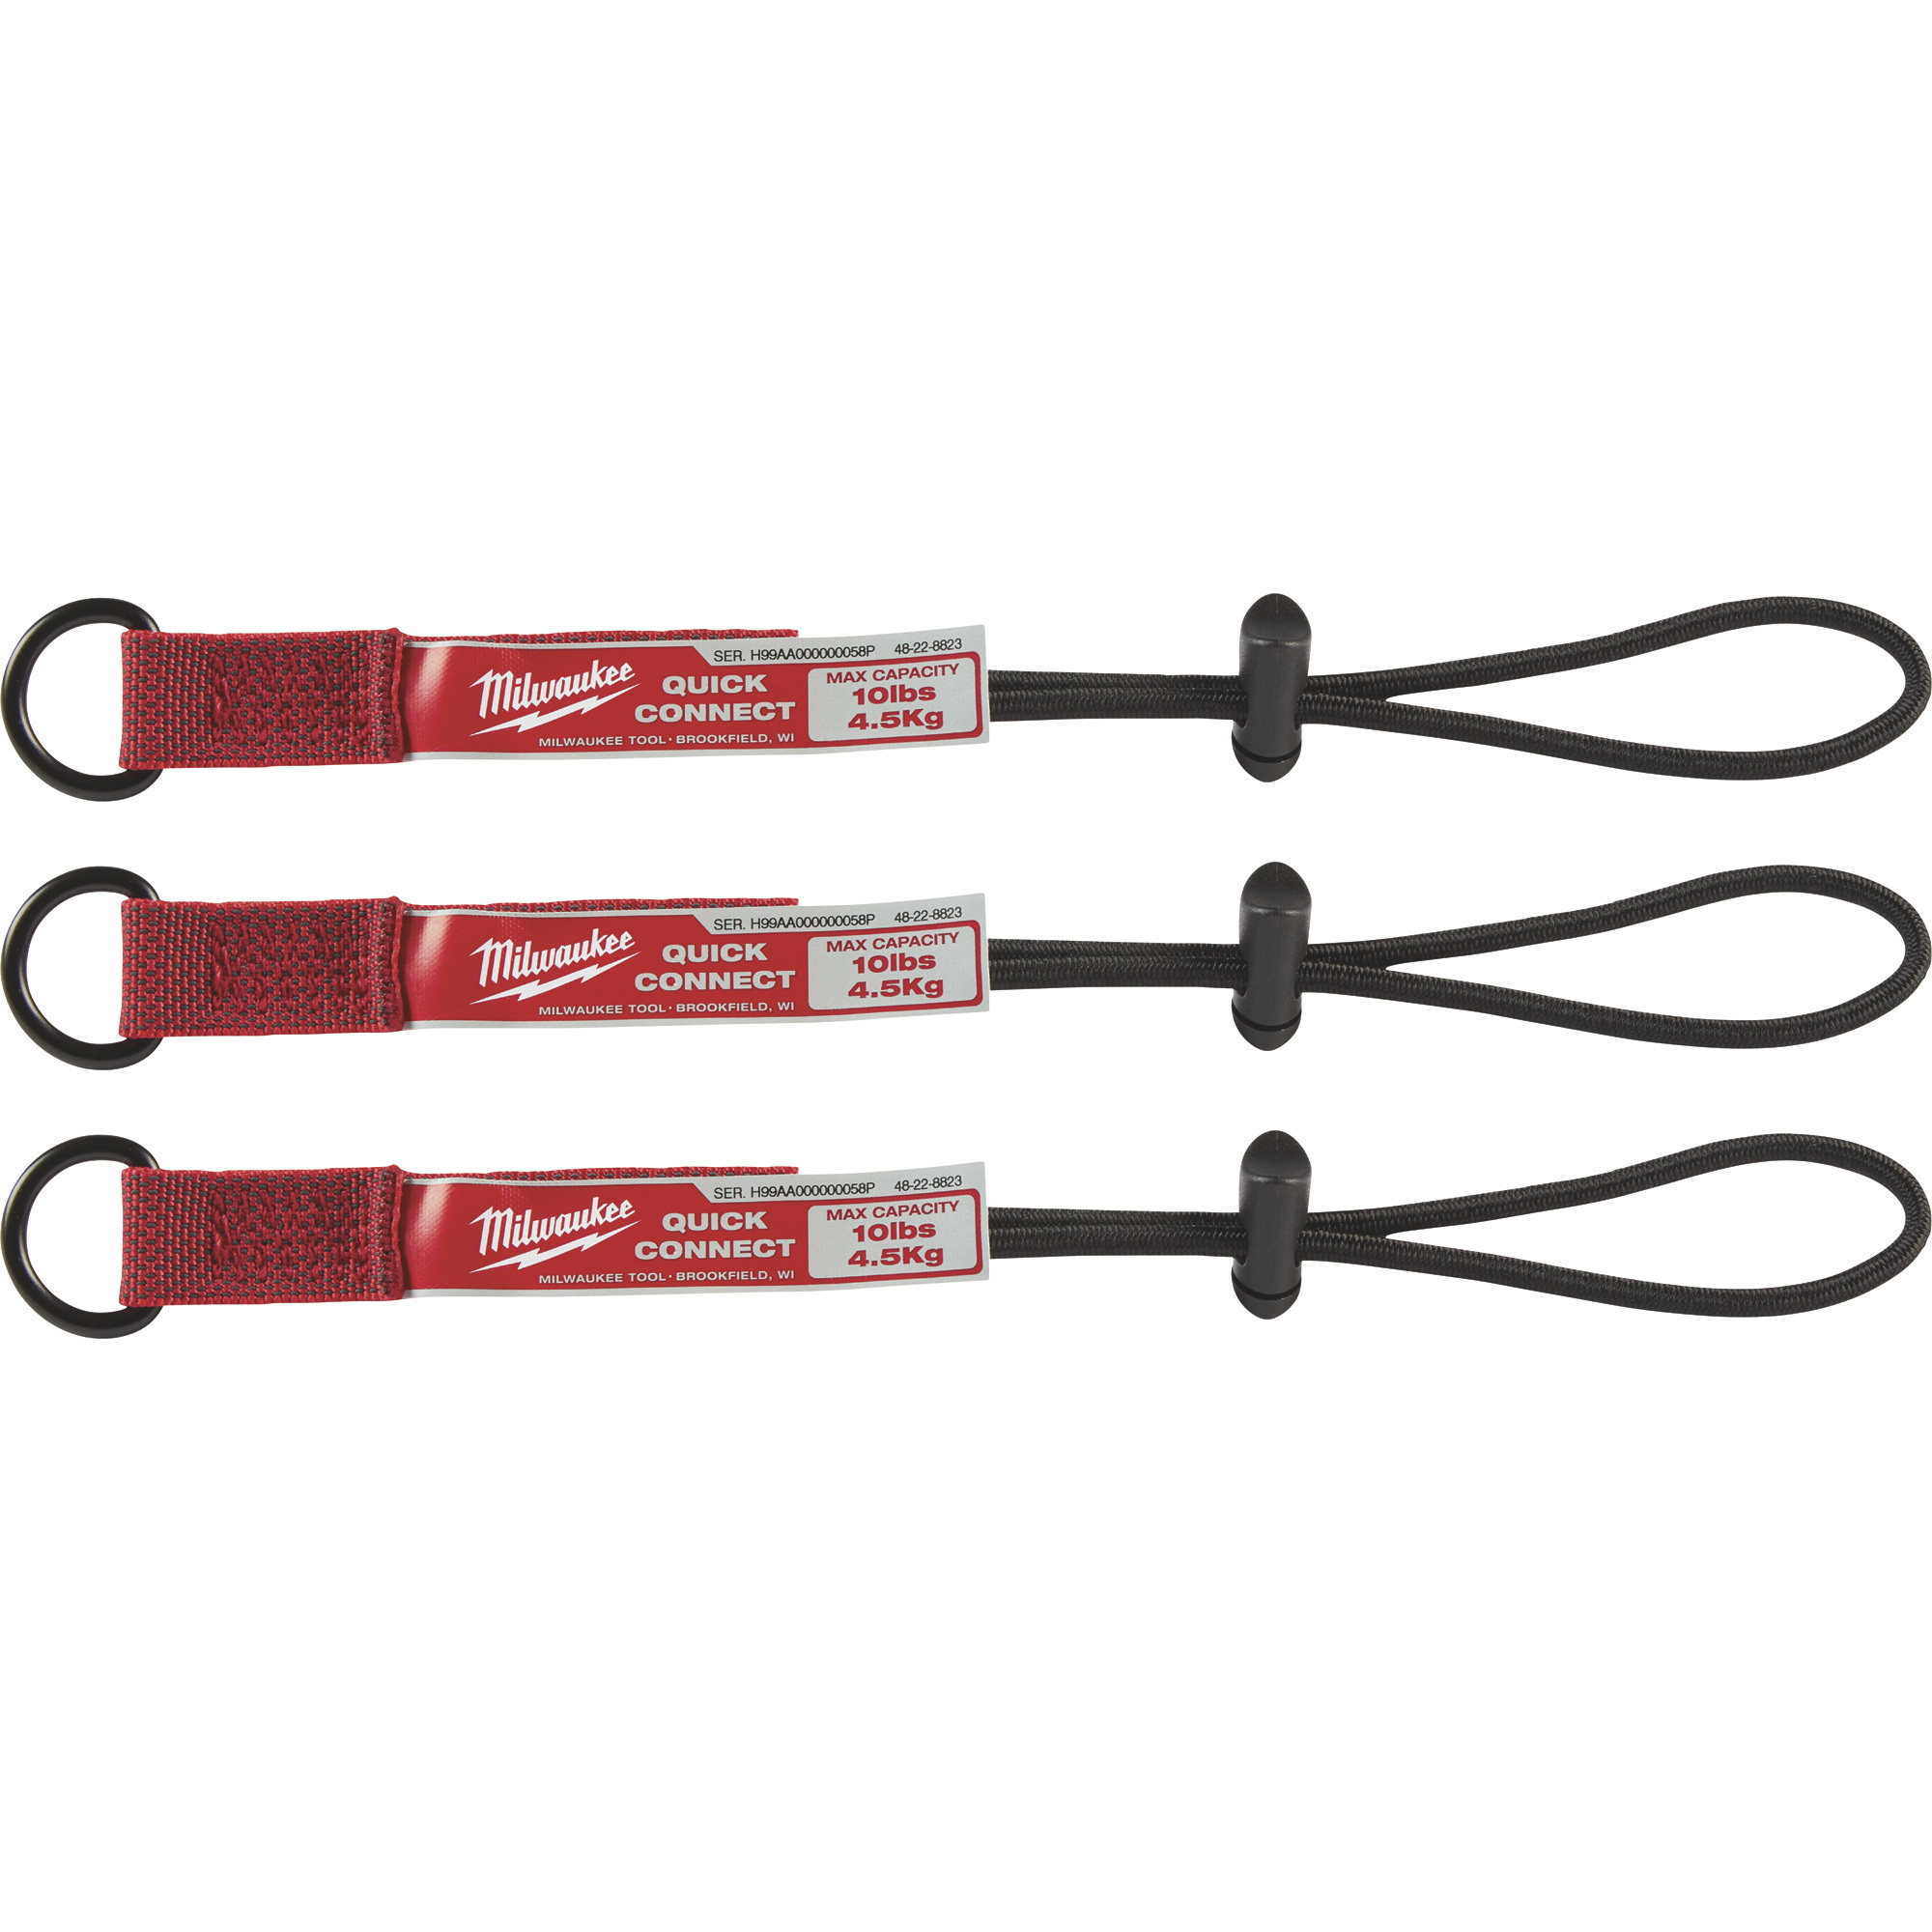 Milwaukee Quick-Connect Tool Lanyard System, 10-Lb. Working Load, Model 48-22-8823